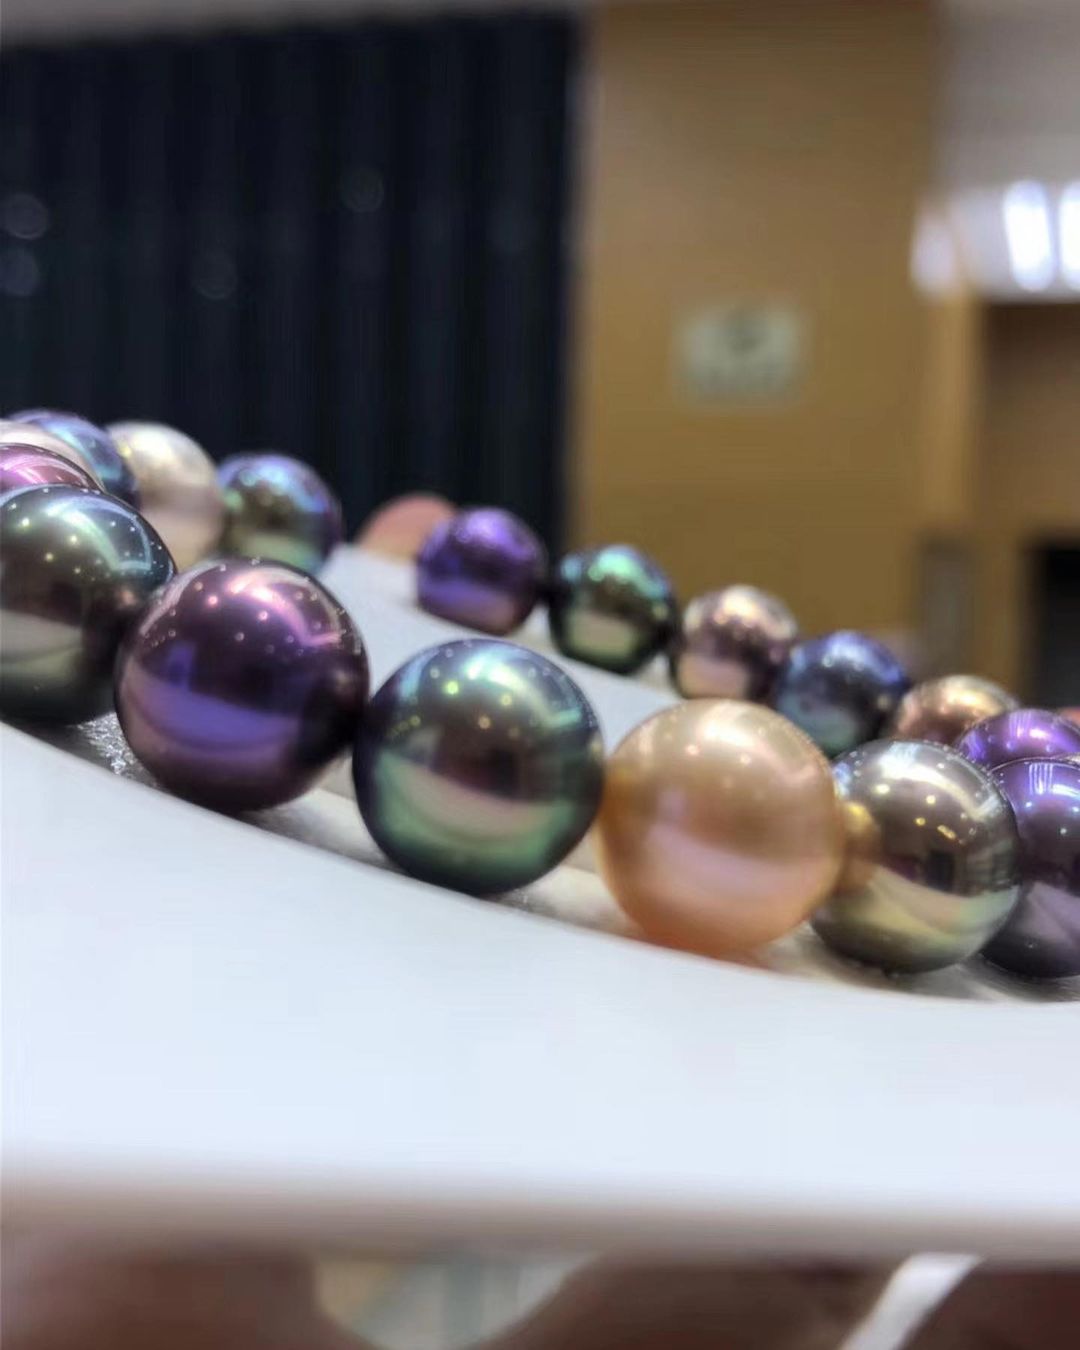 Myseapearl Offers a Unique and High-quality Selection of Pearls Made from Refined, Hand-Picked Saltwater Cultured Pearls